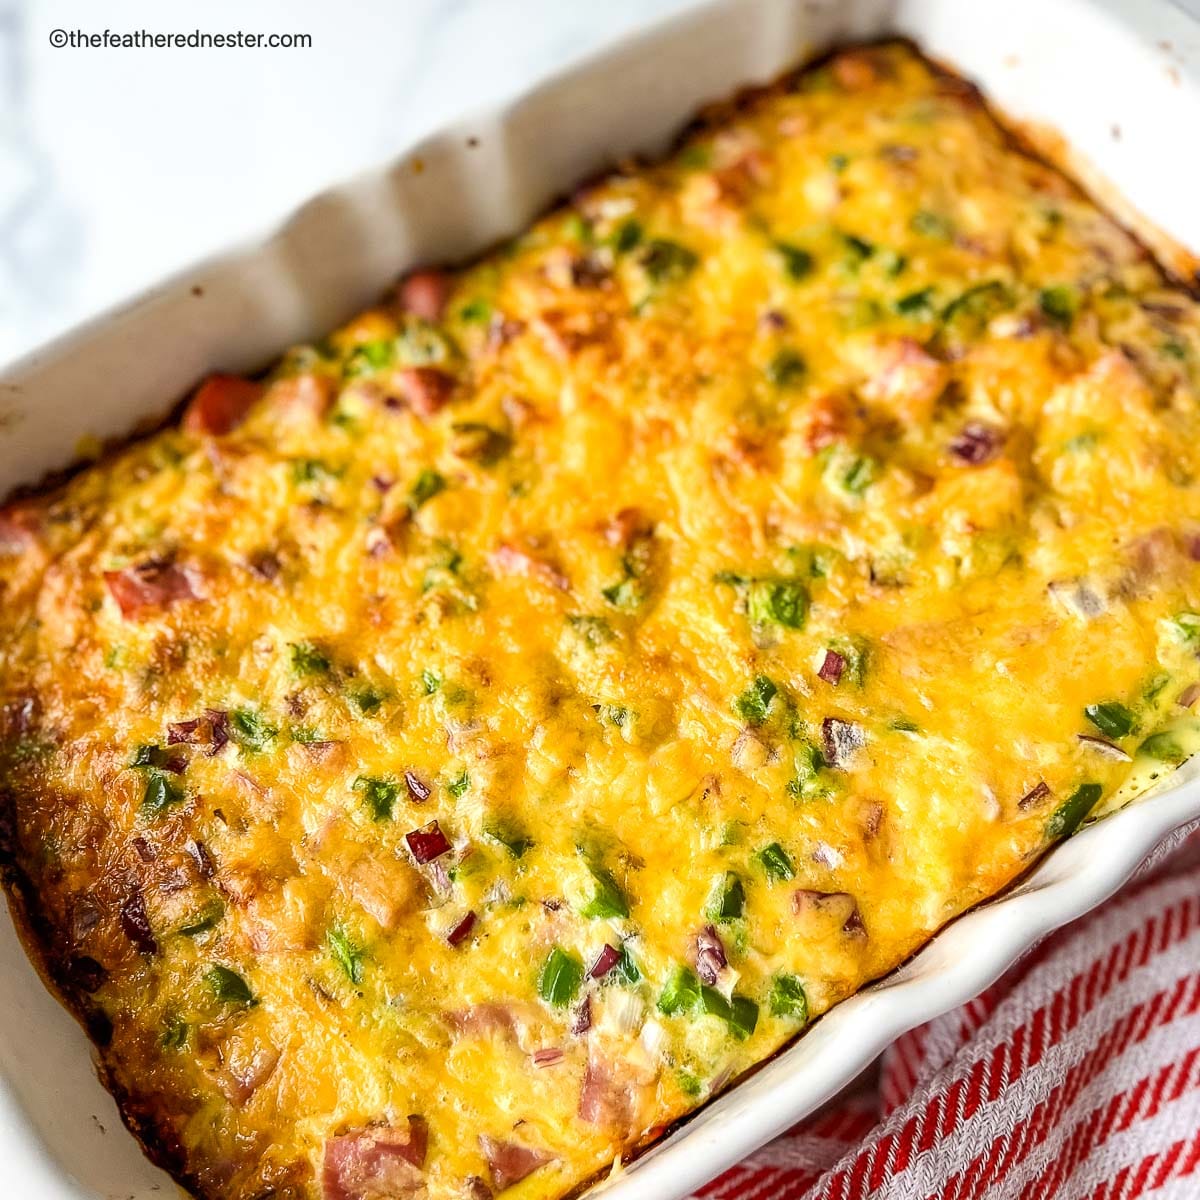 Ham and tater tot casserole, fully baked.